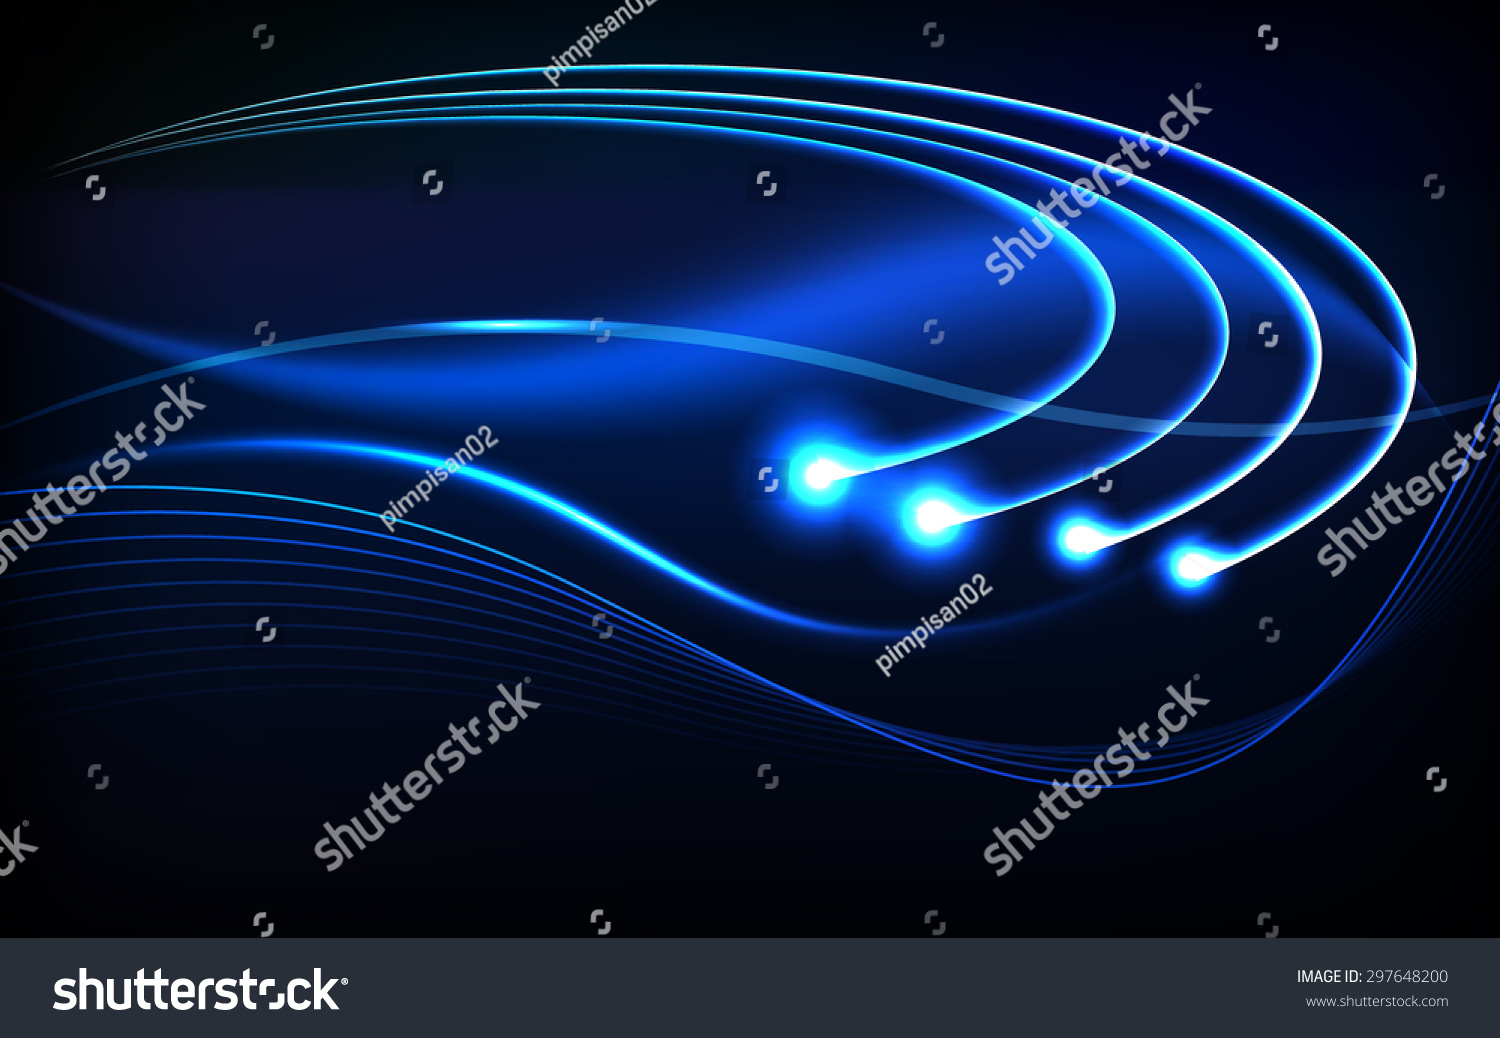 Vector Illustration Blue Abstract Background Stock Vector 297648200